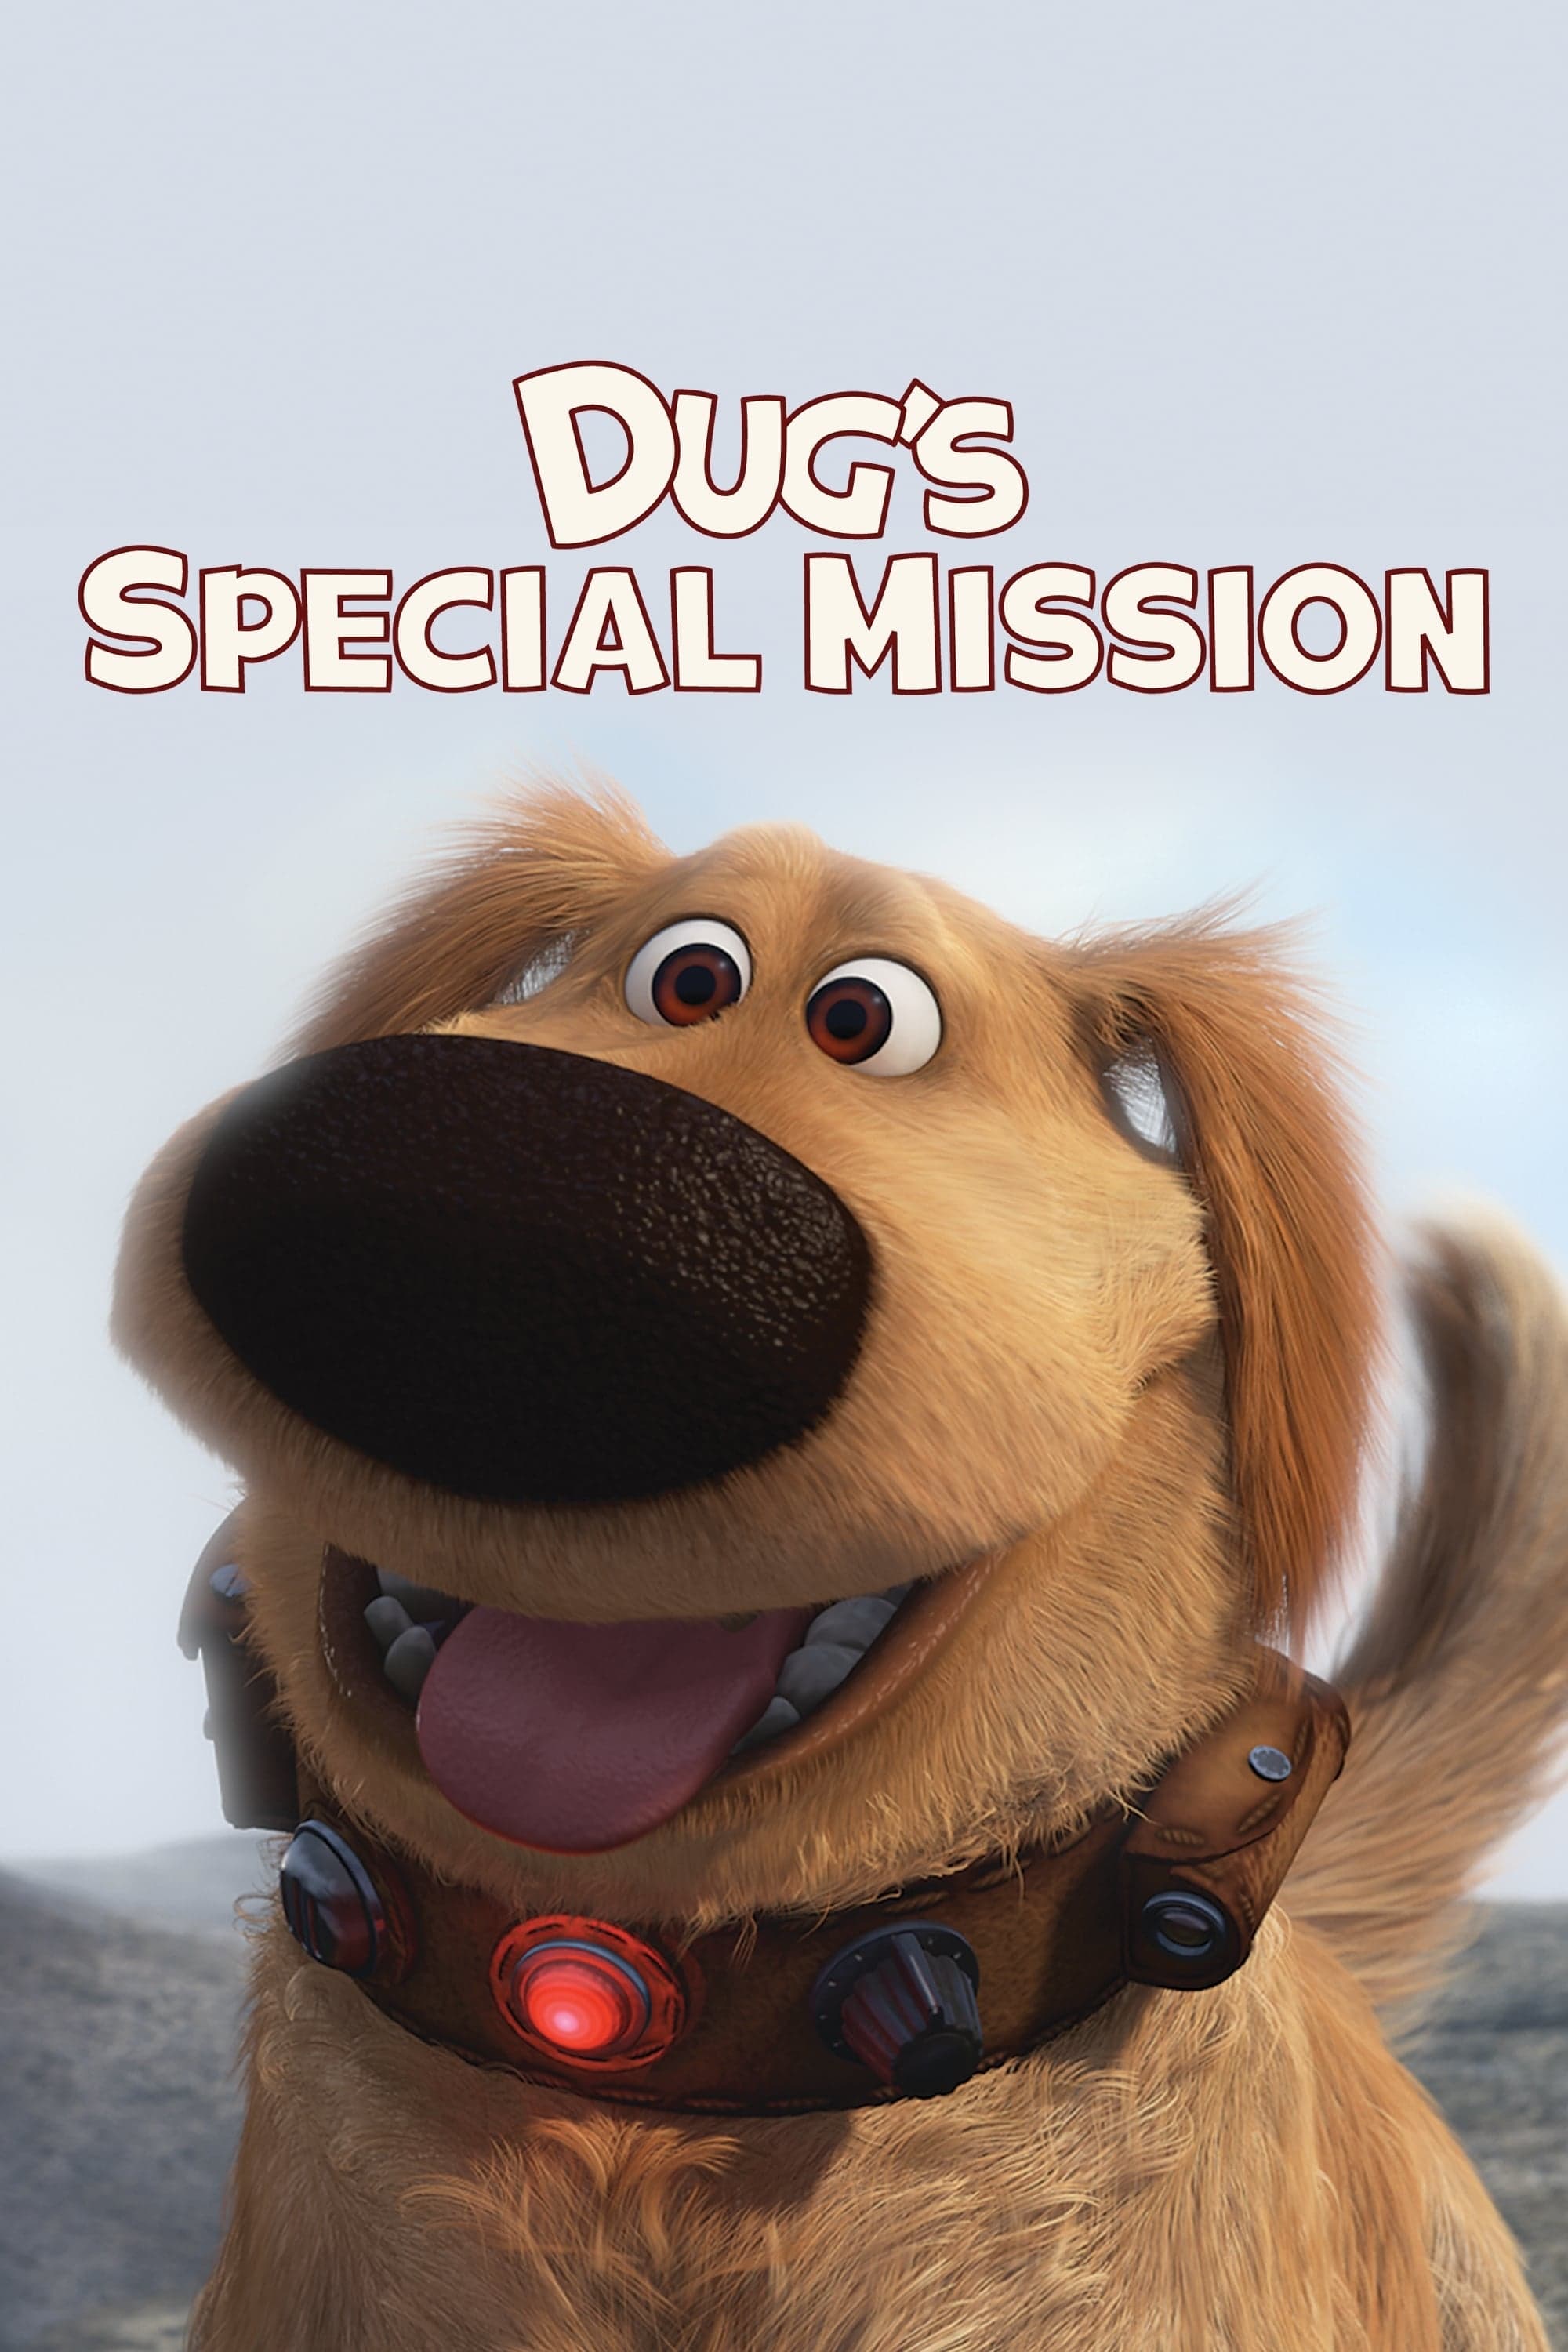 Dug's Special Mission (2009)